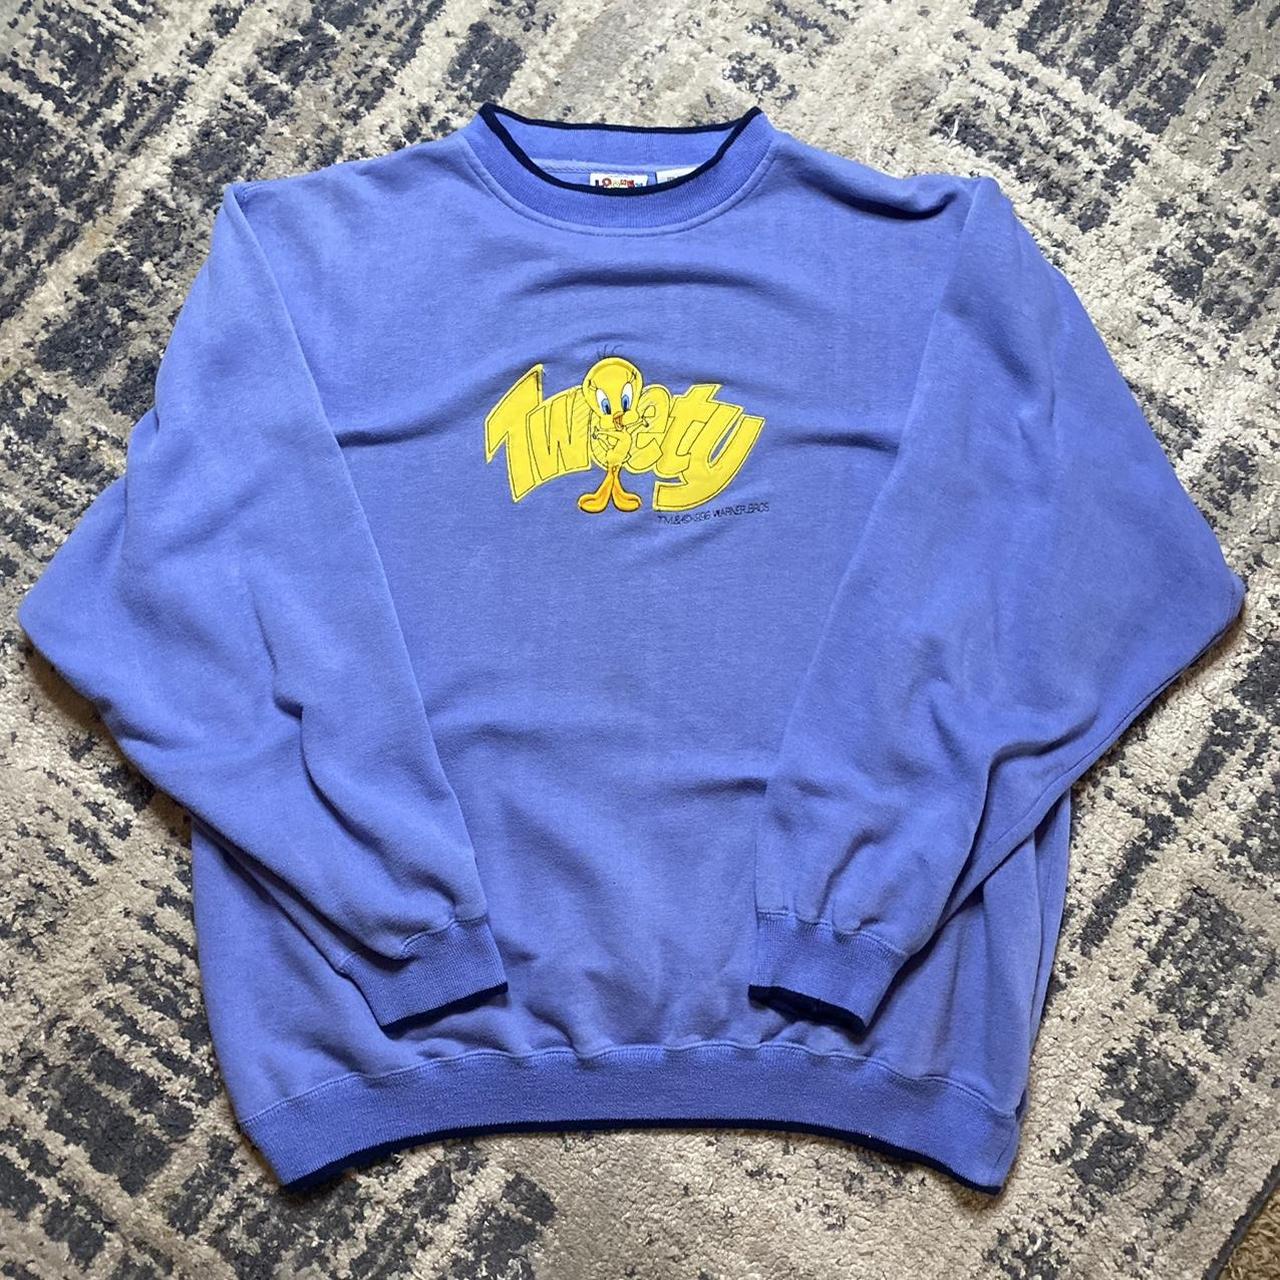 item listed by steezyvtg